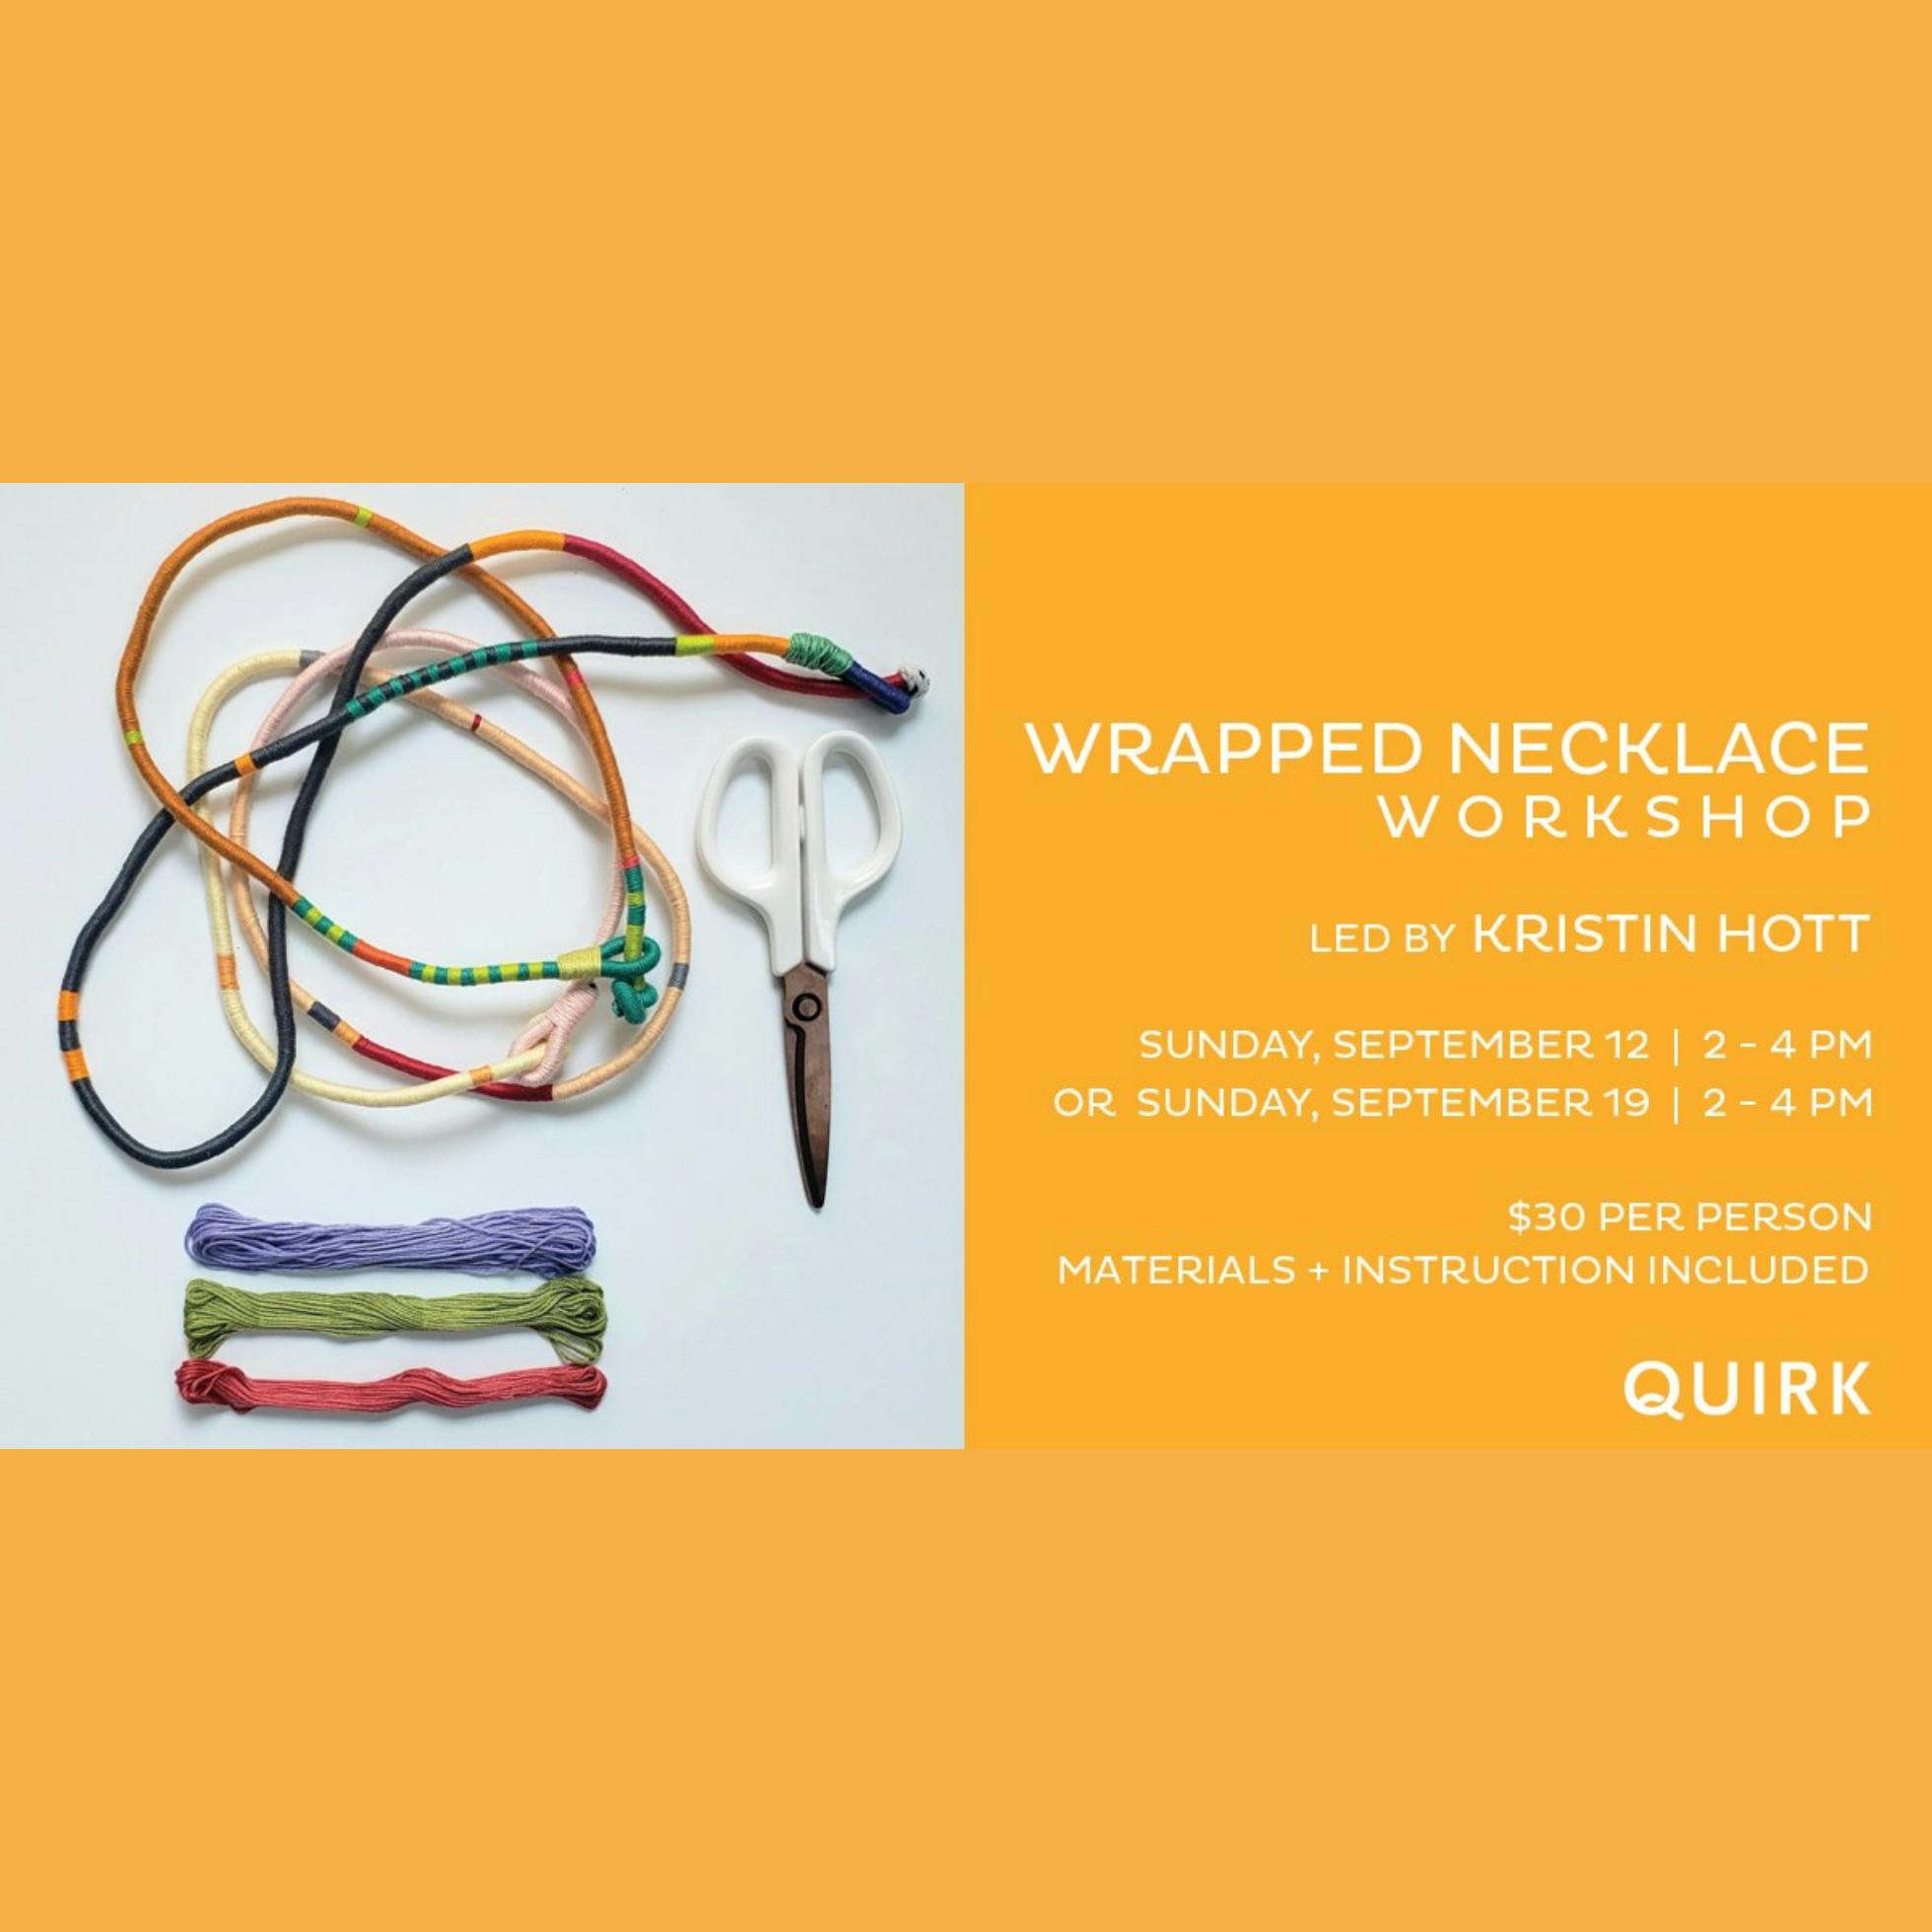 Wrapped Necklace Workshop with Kristin Hott